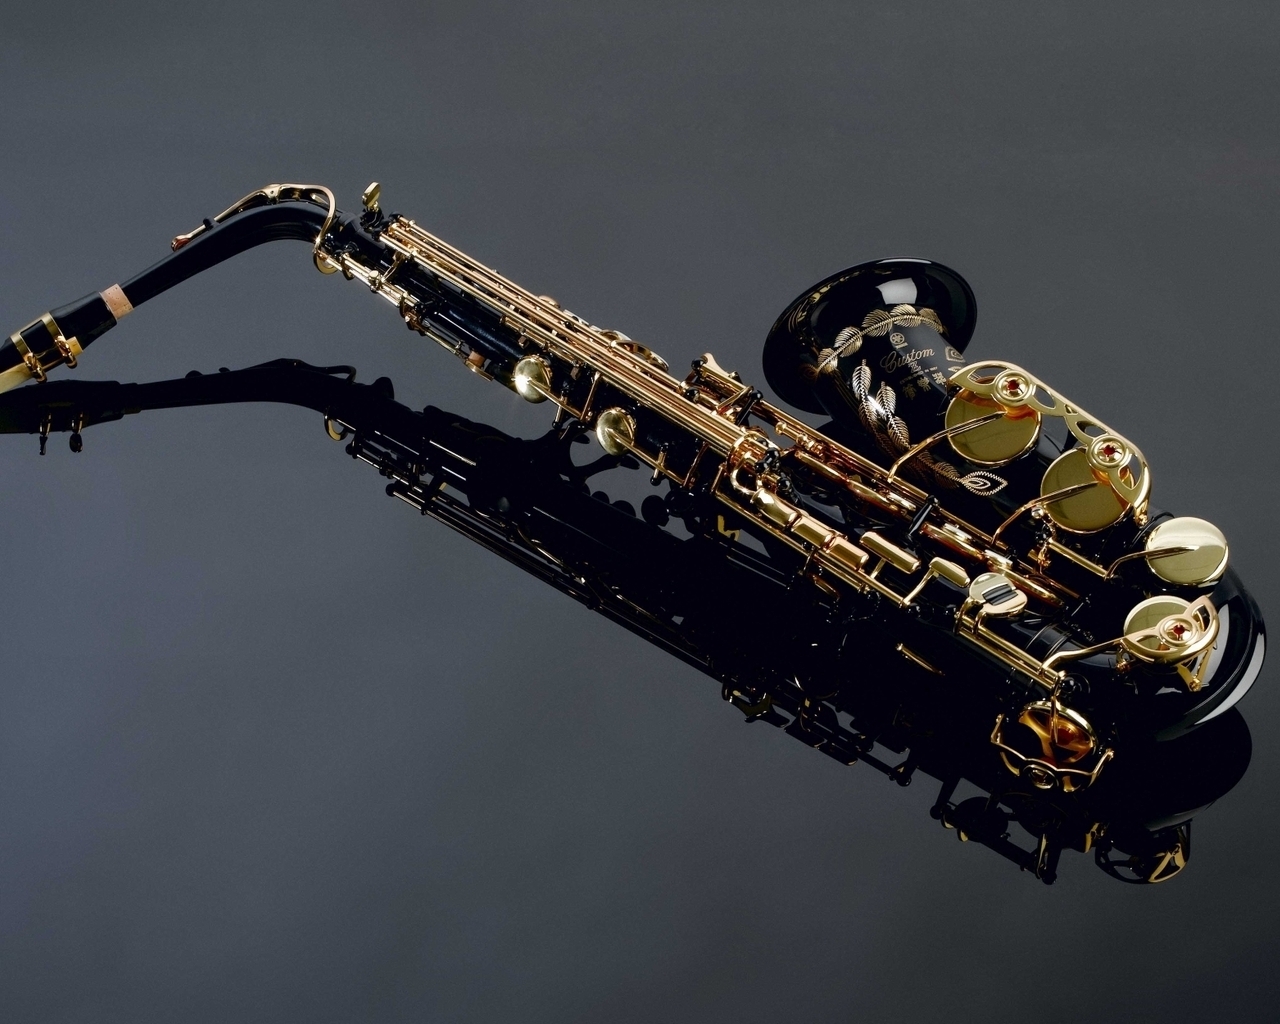 Saxophone for 1280 x 1024 resolution